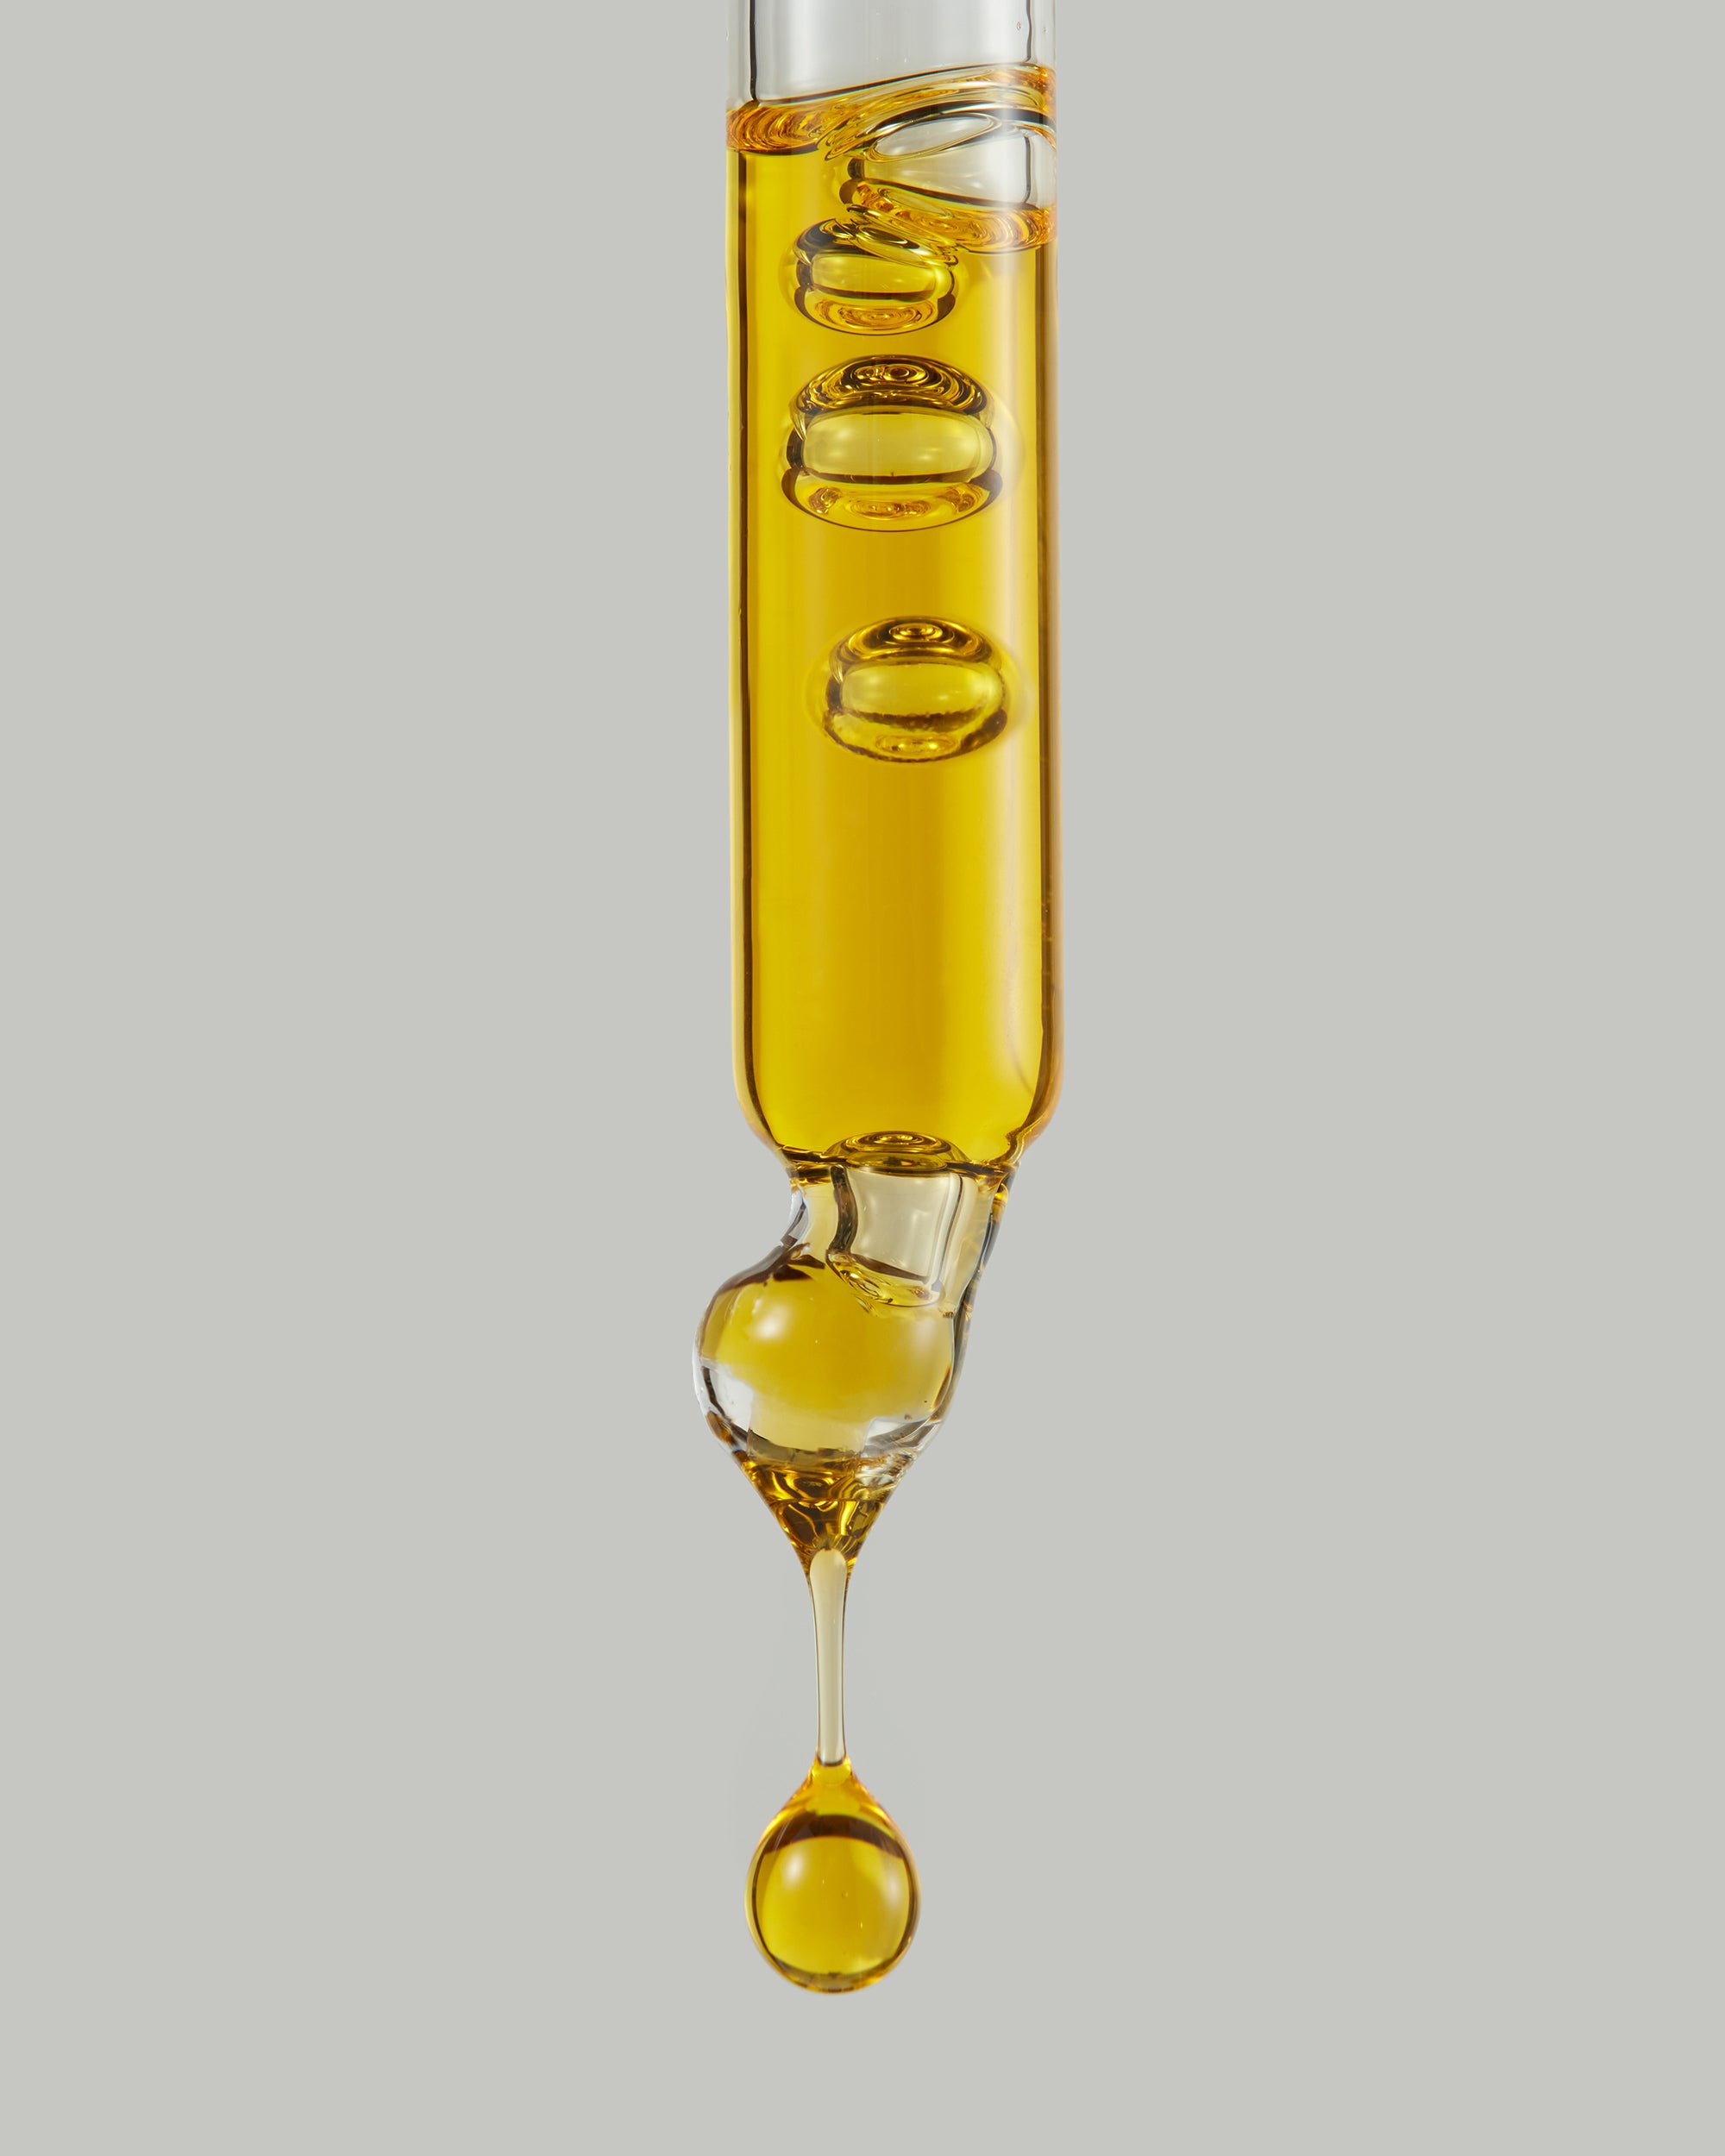 golden orange skincare oil dripping from a glass pipette on grey background